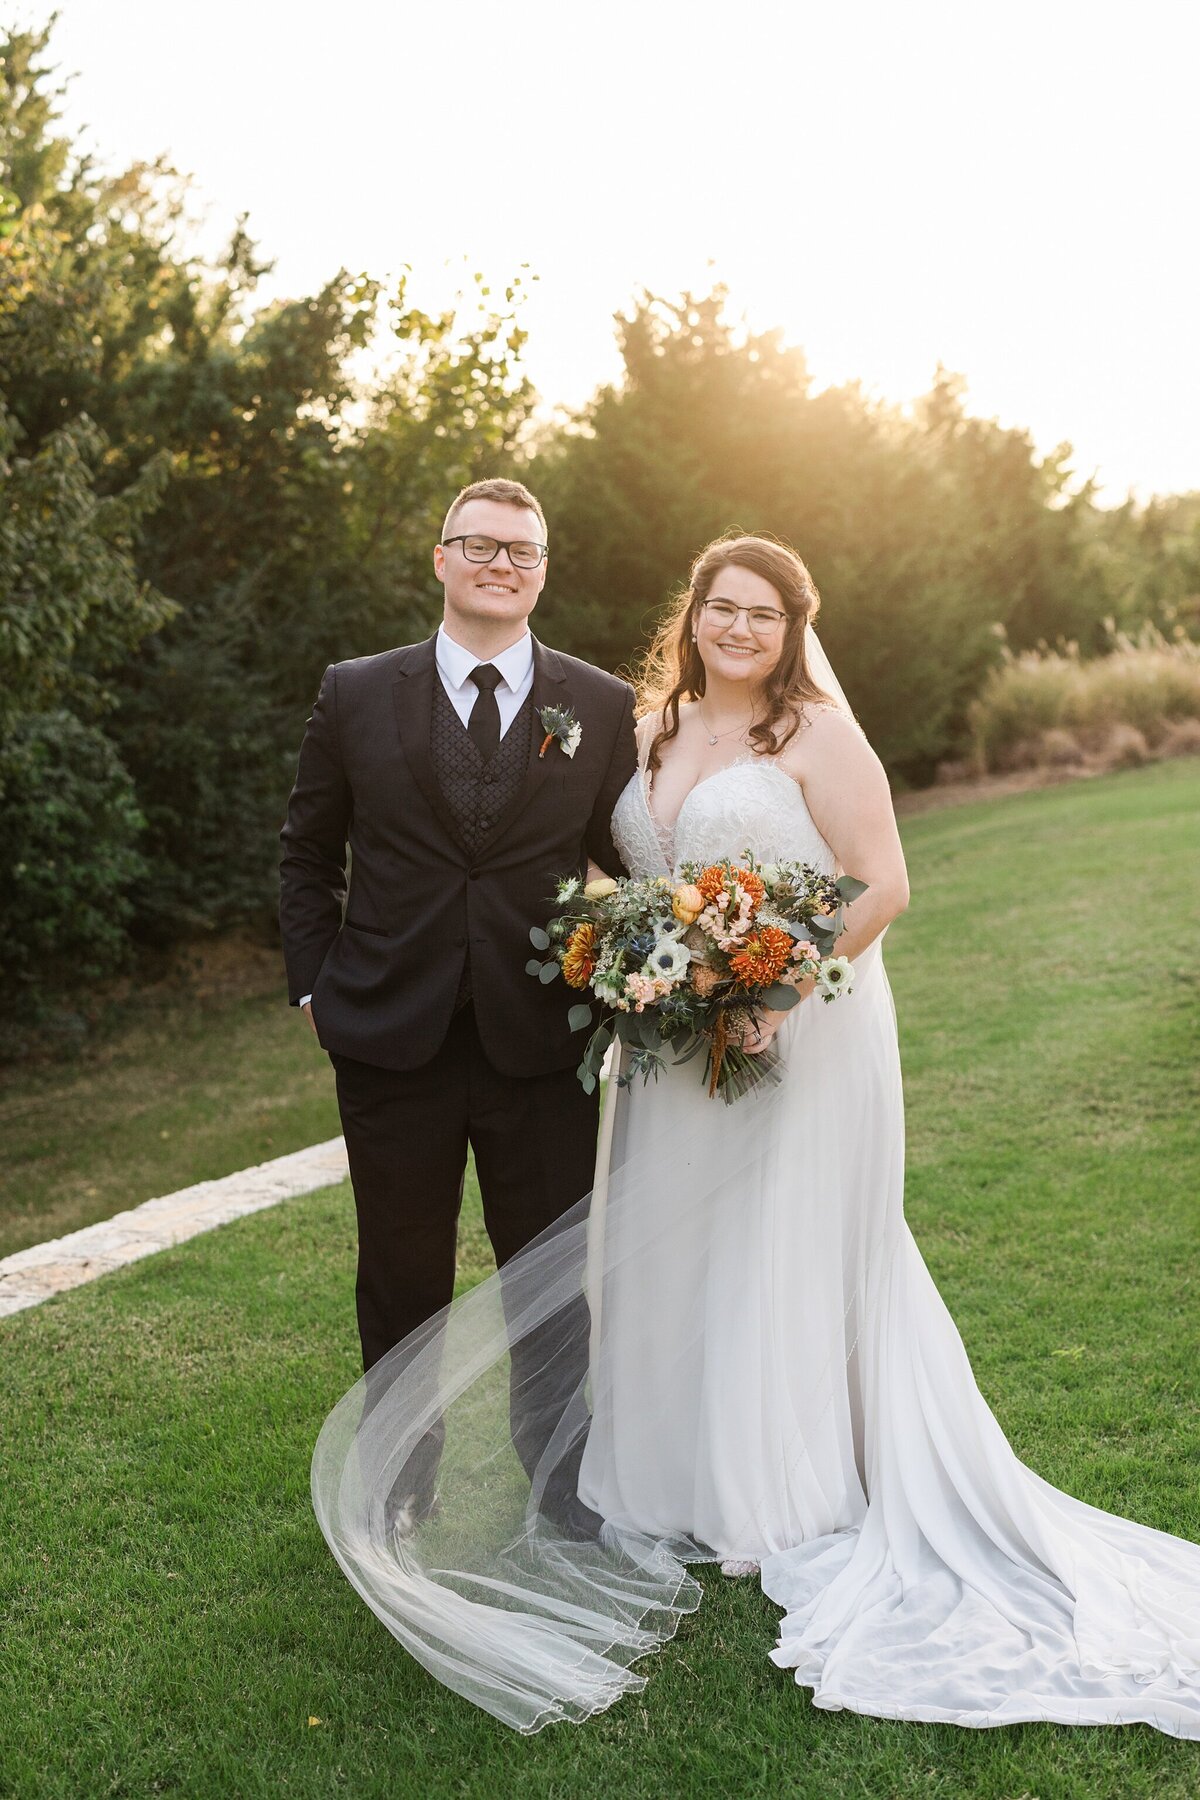 A portrait of a bride and groom posing together outside after their wedding ceremony at The Laurel in Grapevine, Texas. The bride is on the right and is wearing a long, flowing, sleeveless, white dress with a long, flowing veil and is holding a large, colorful bouquet. The groom is on the left and is wearing a black, three piece suit with a boutonniere.